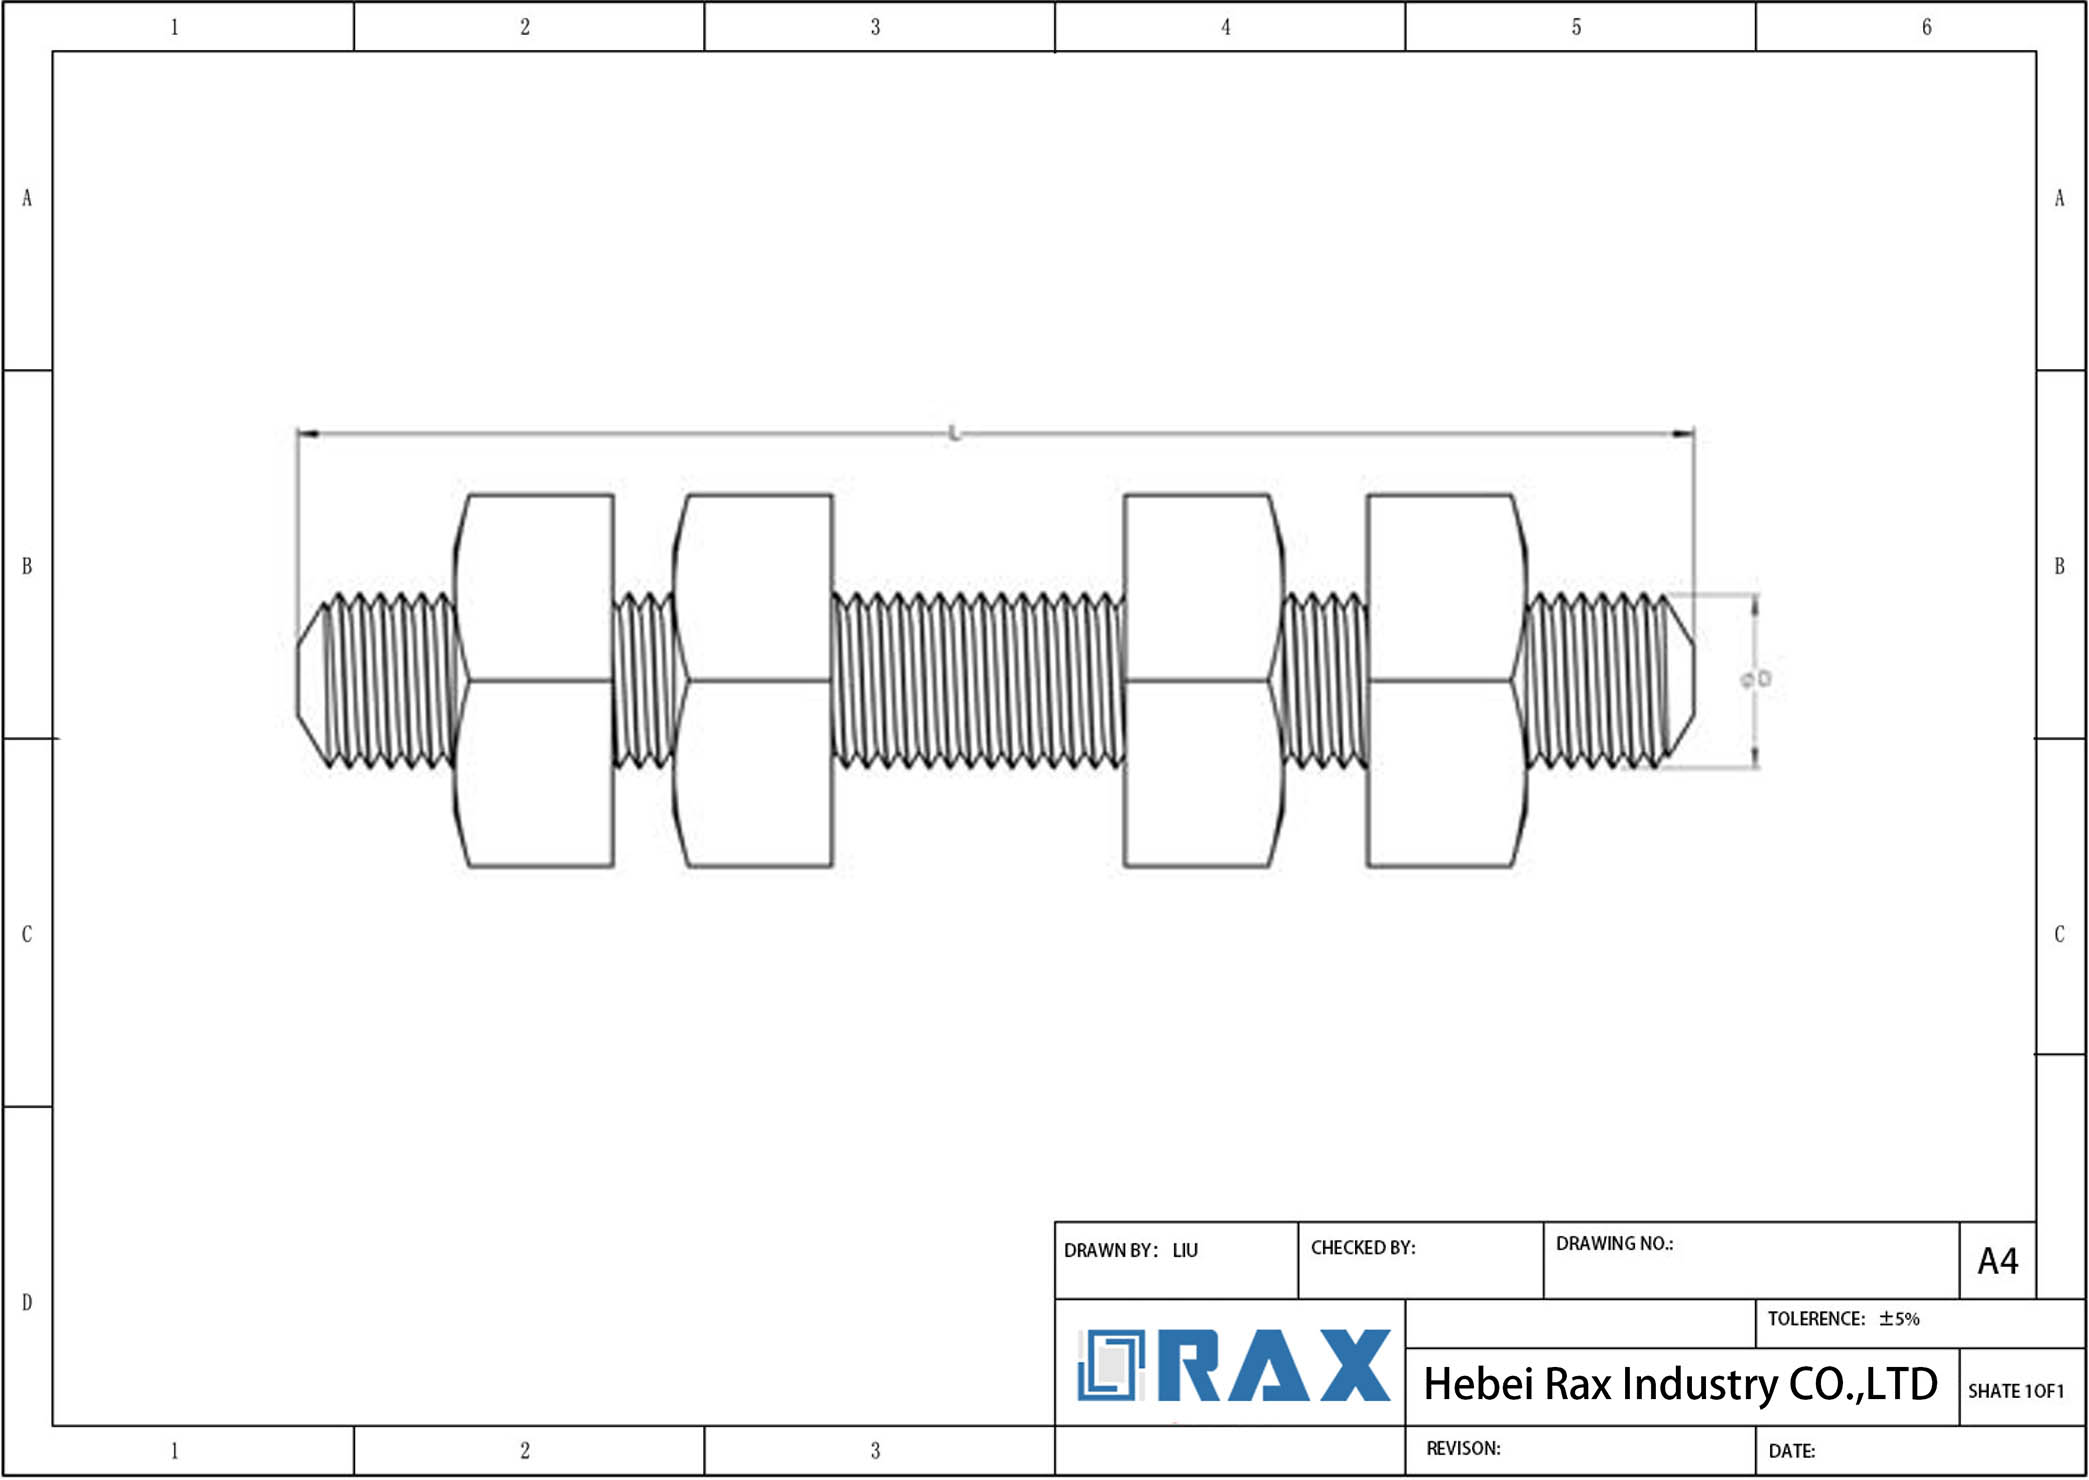 Technical specification of double arming bolt